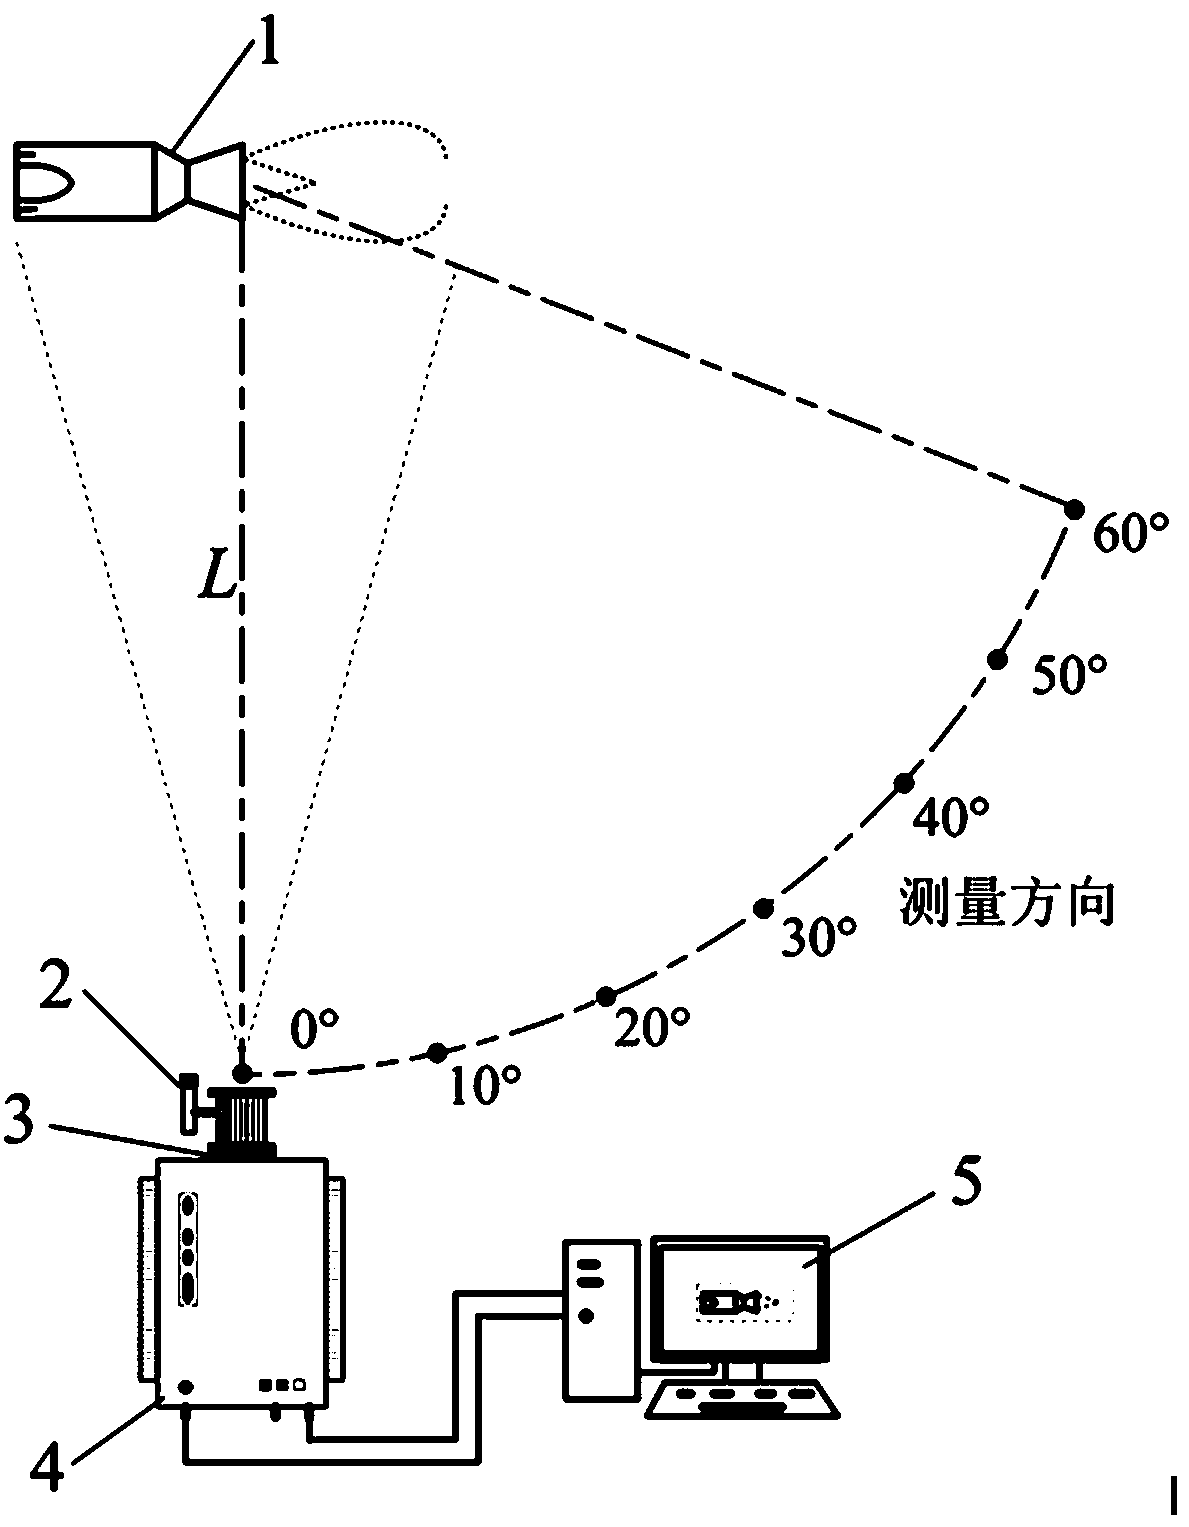 Target Infrared Integrated Radiation Intensity Test Method and Equipment Based on Infrared Thermal Imager